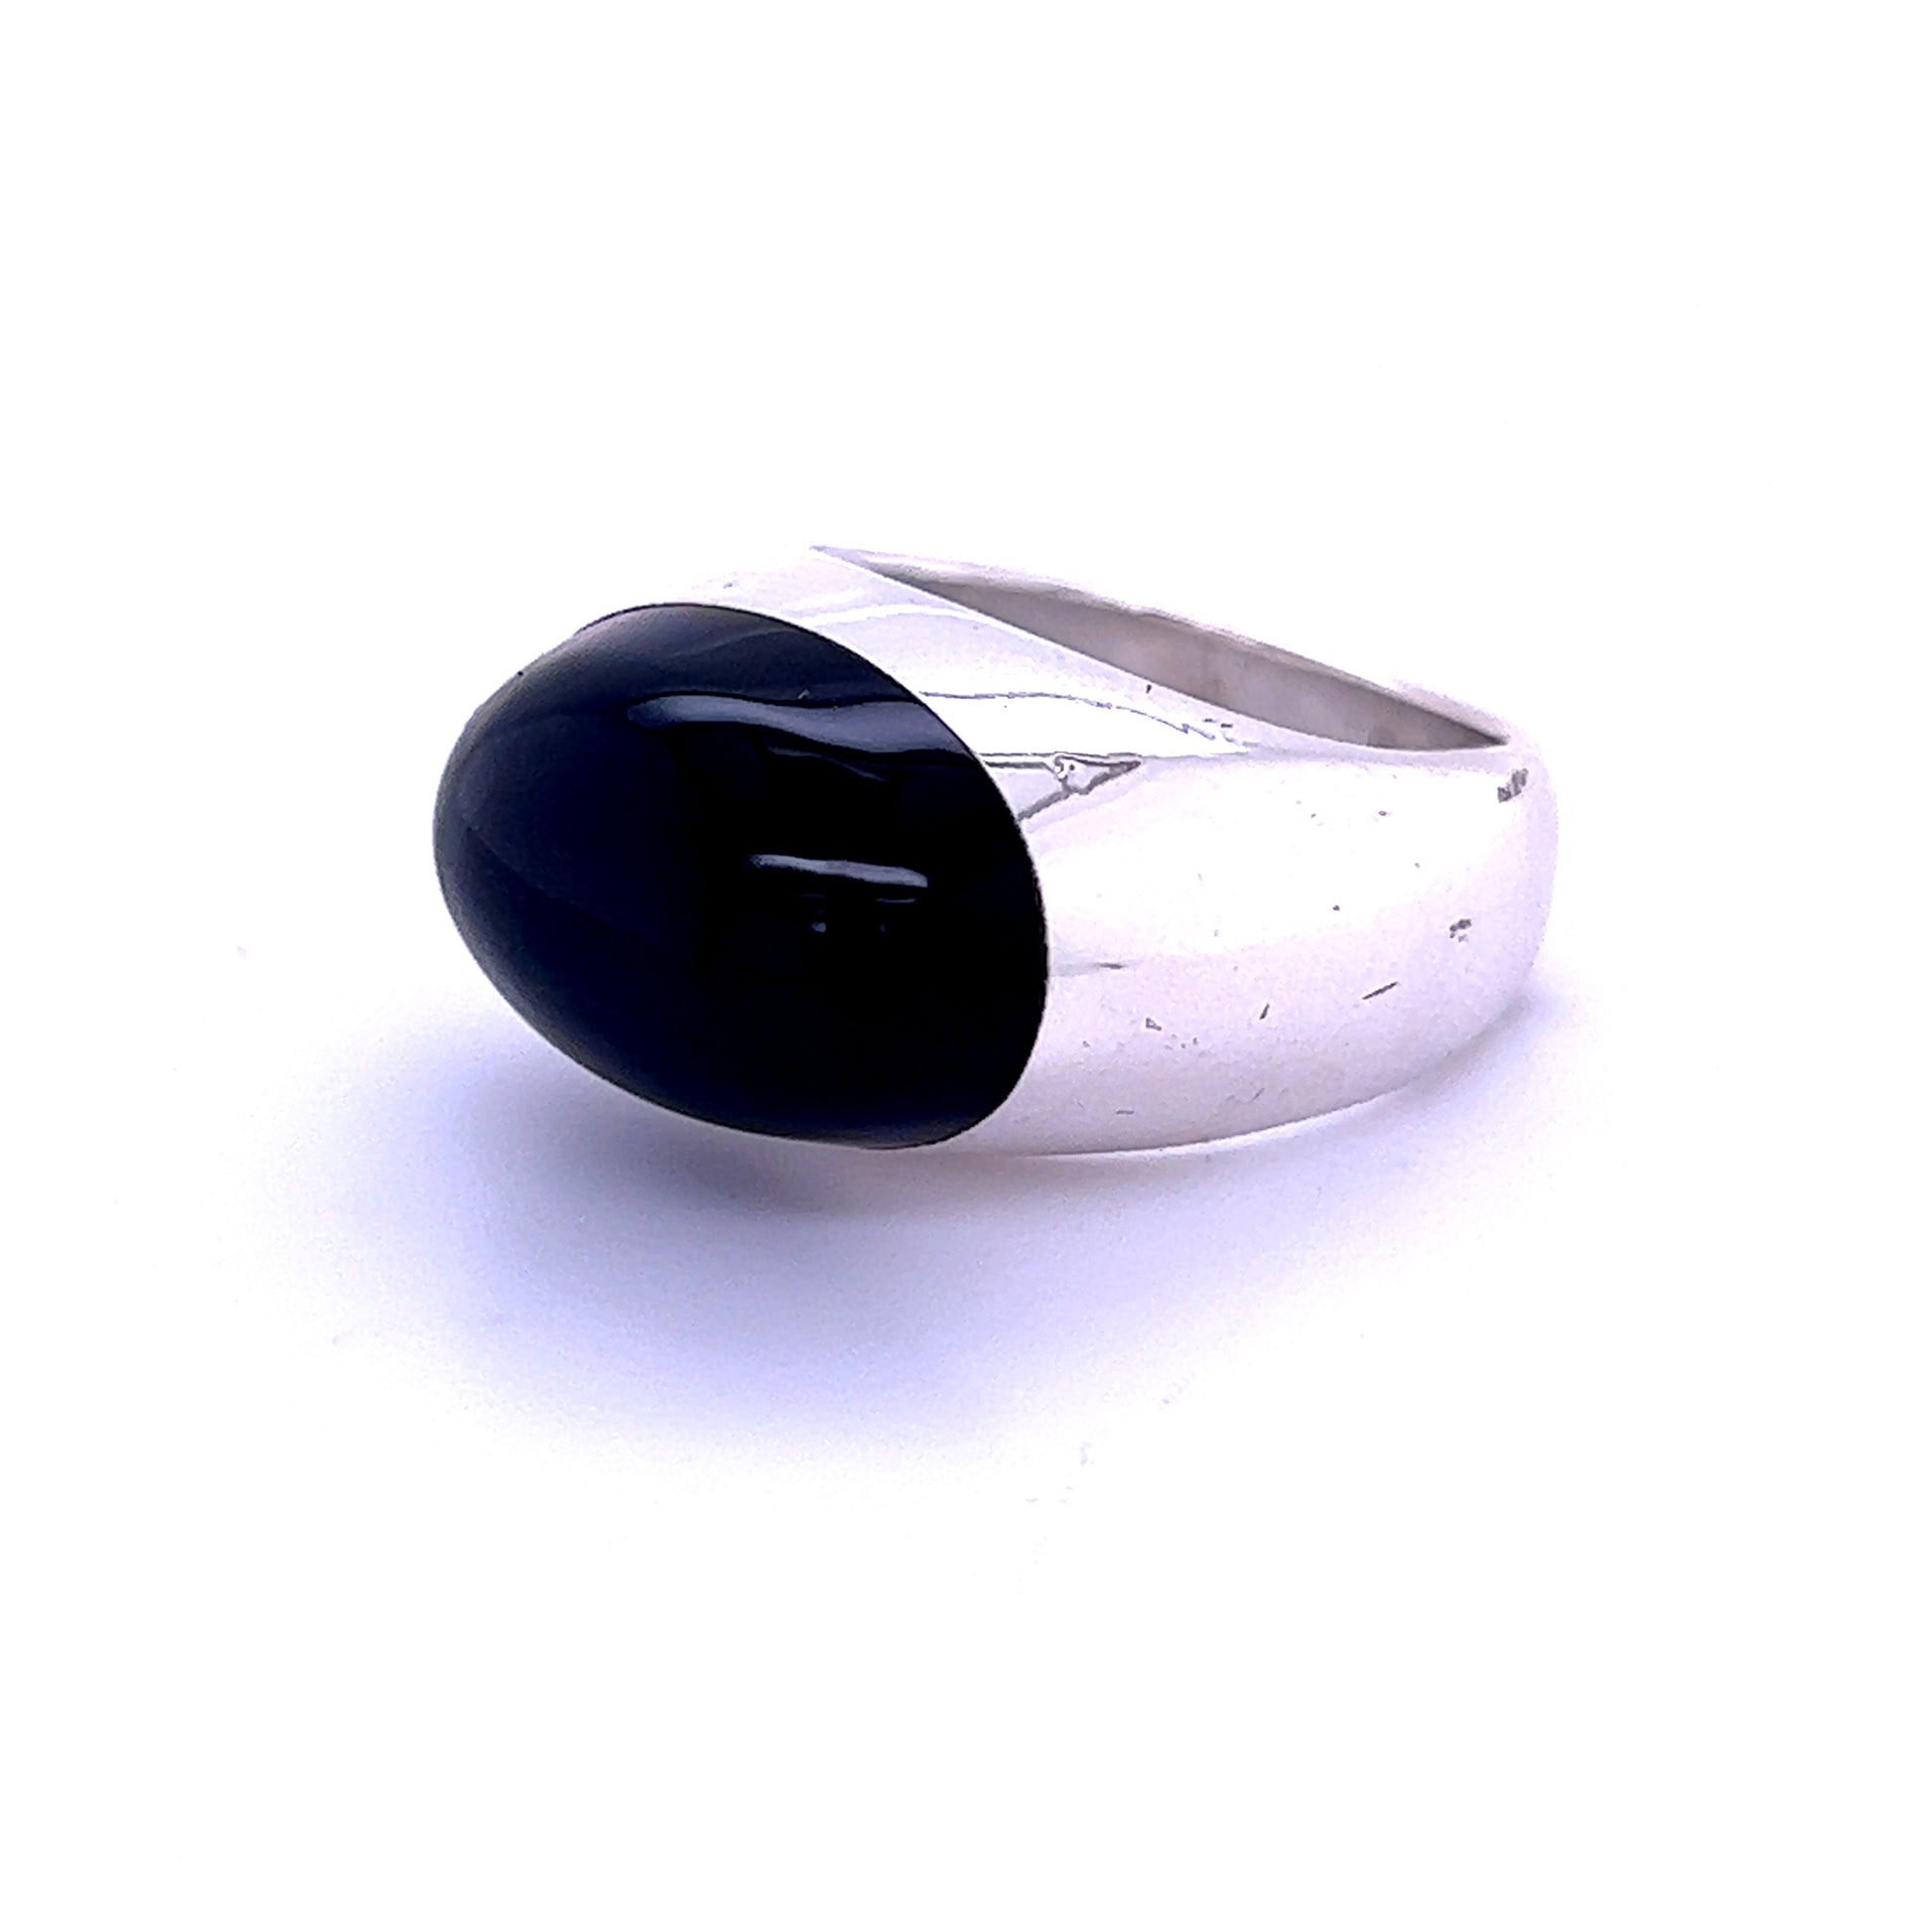 Gucci Estate Black Onyx Ring Size 6.75 Sterling Silver 6 mm G22